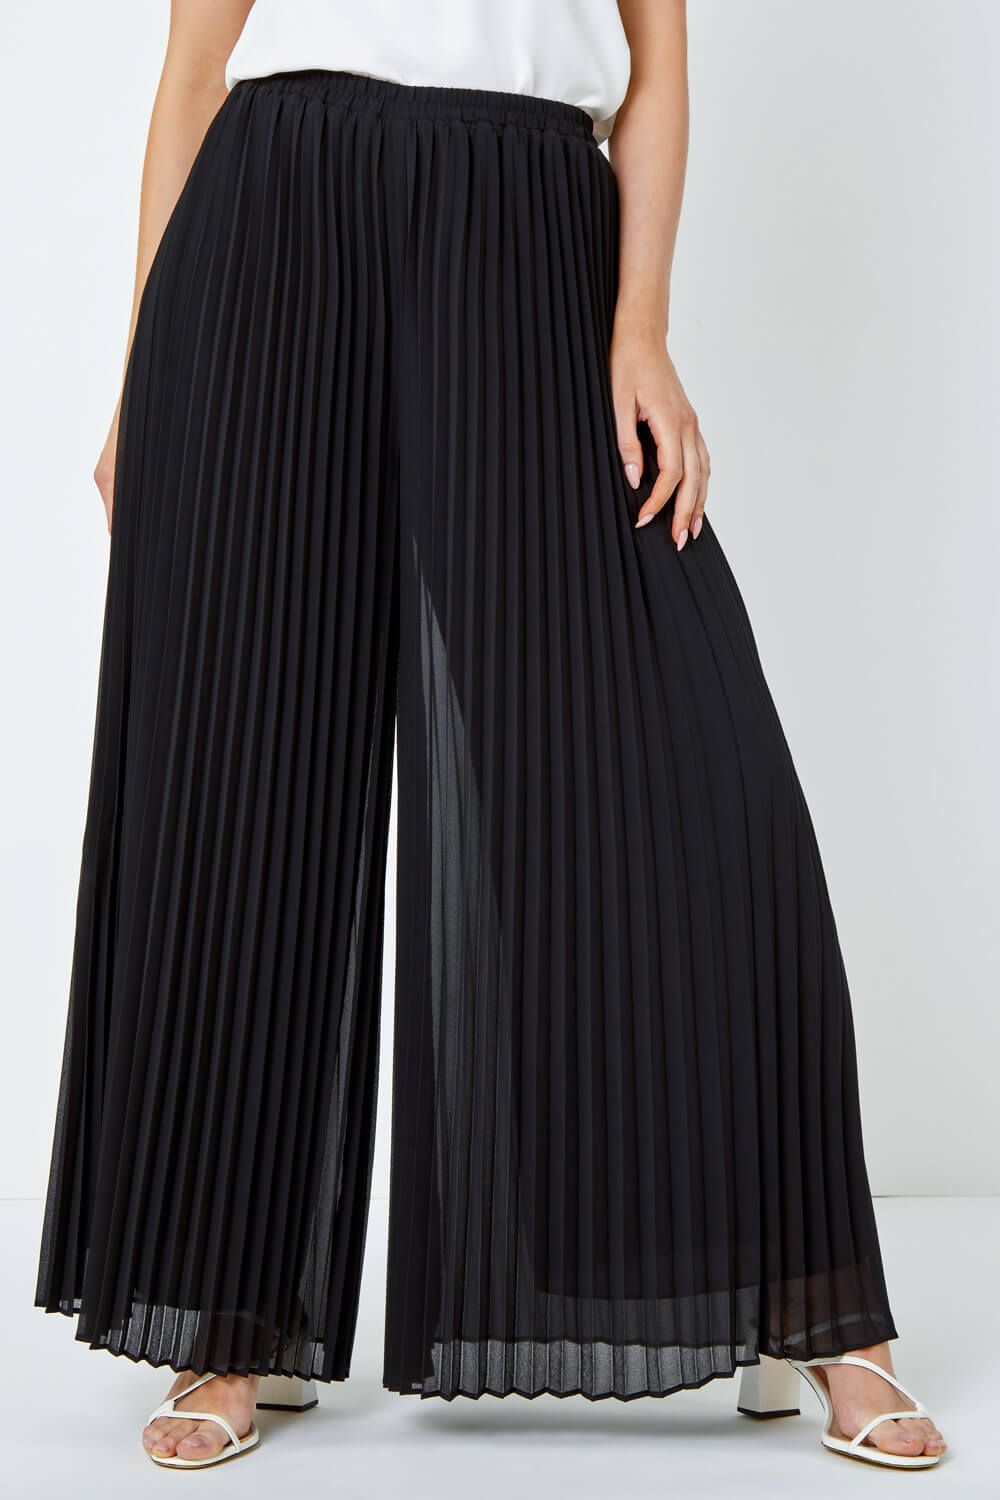 This Pleated Pant Trend Looks Amazing on Women Over 40 But Tricky